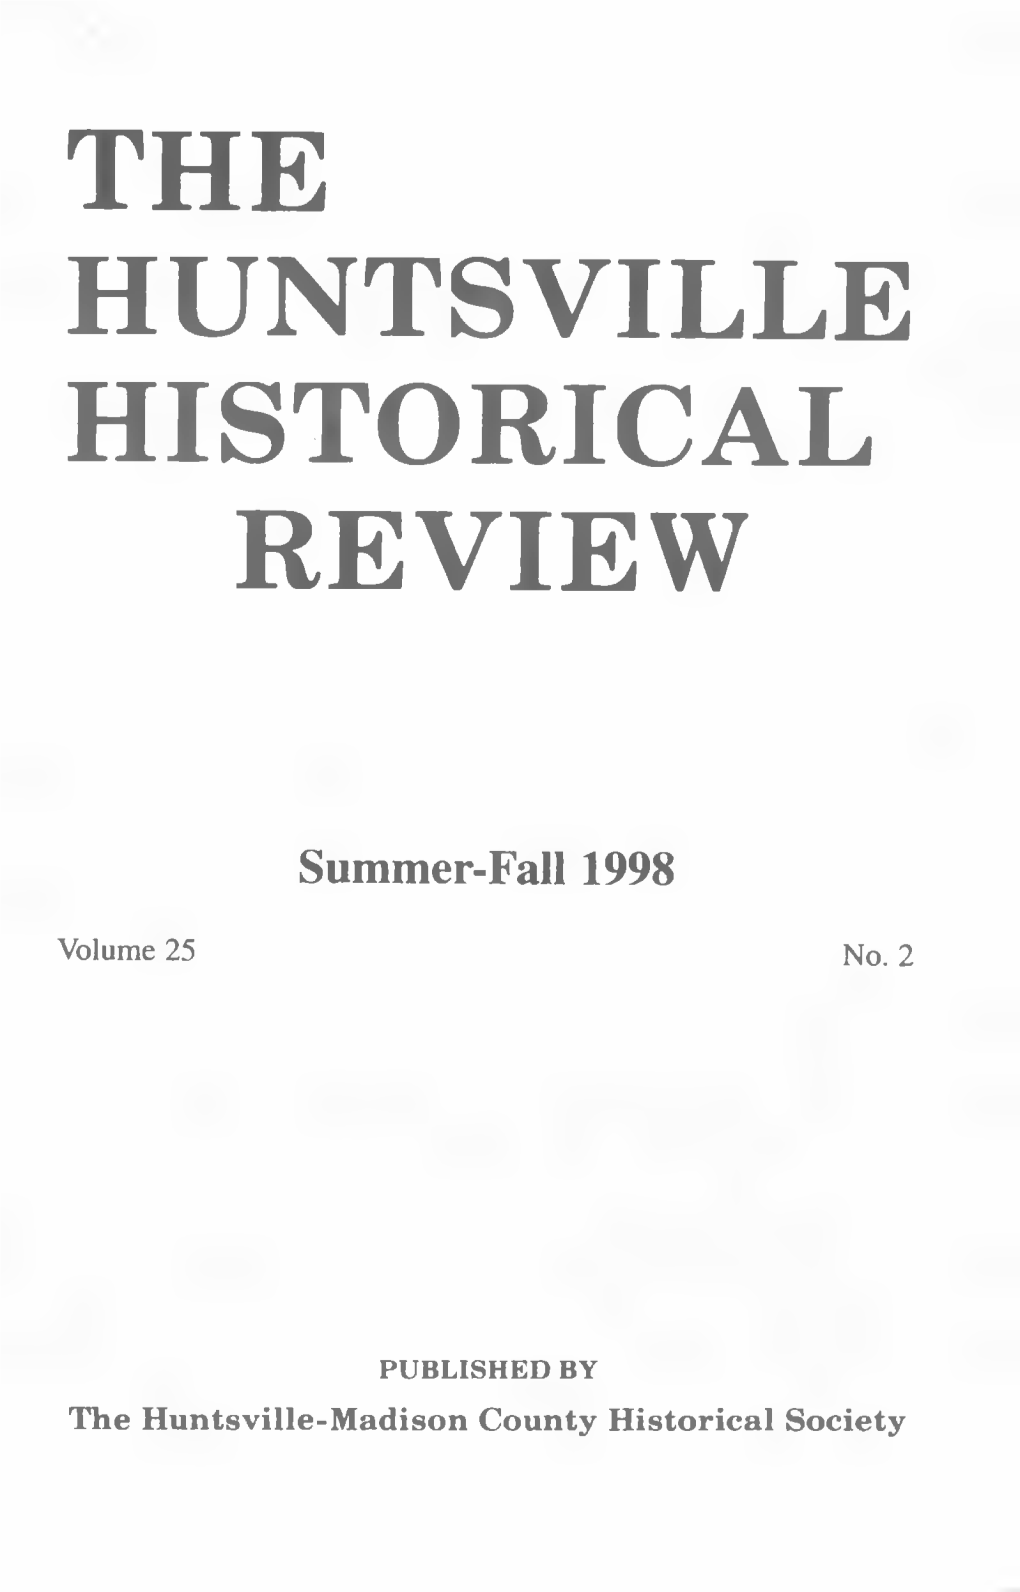 The Huntsville Historical Review